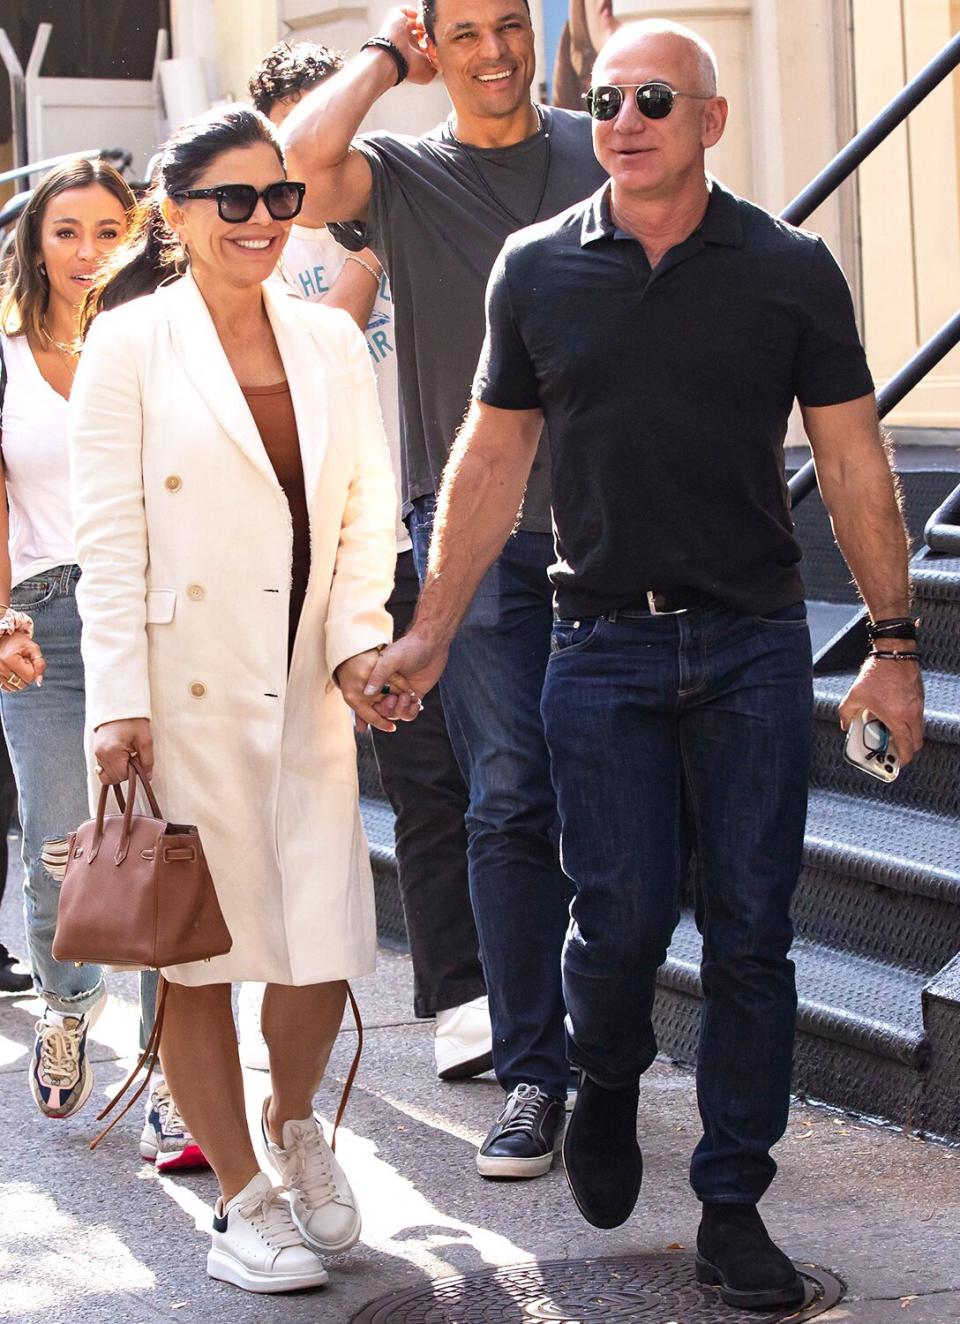 Lauren Sanchez and Jeff Bezos exiting Cipriani's Downtown New York on October 15, 2021.